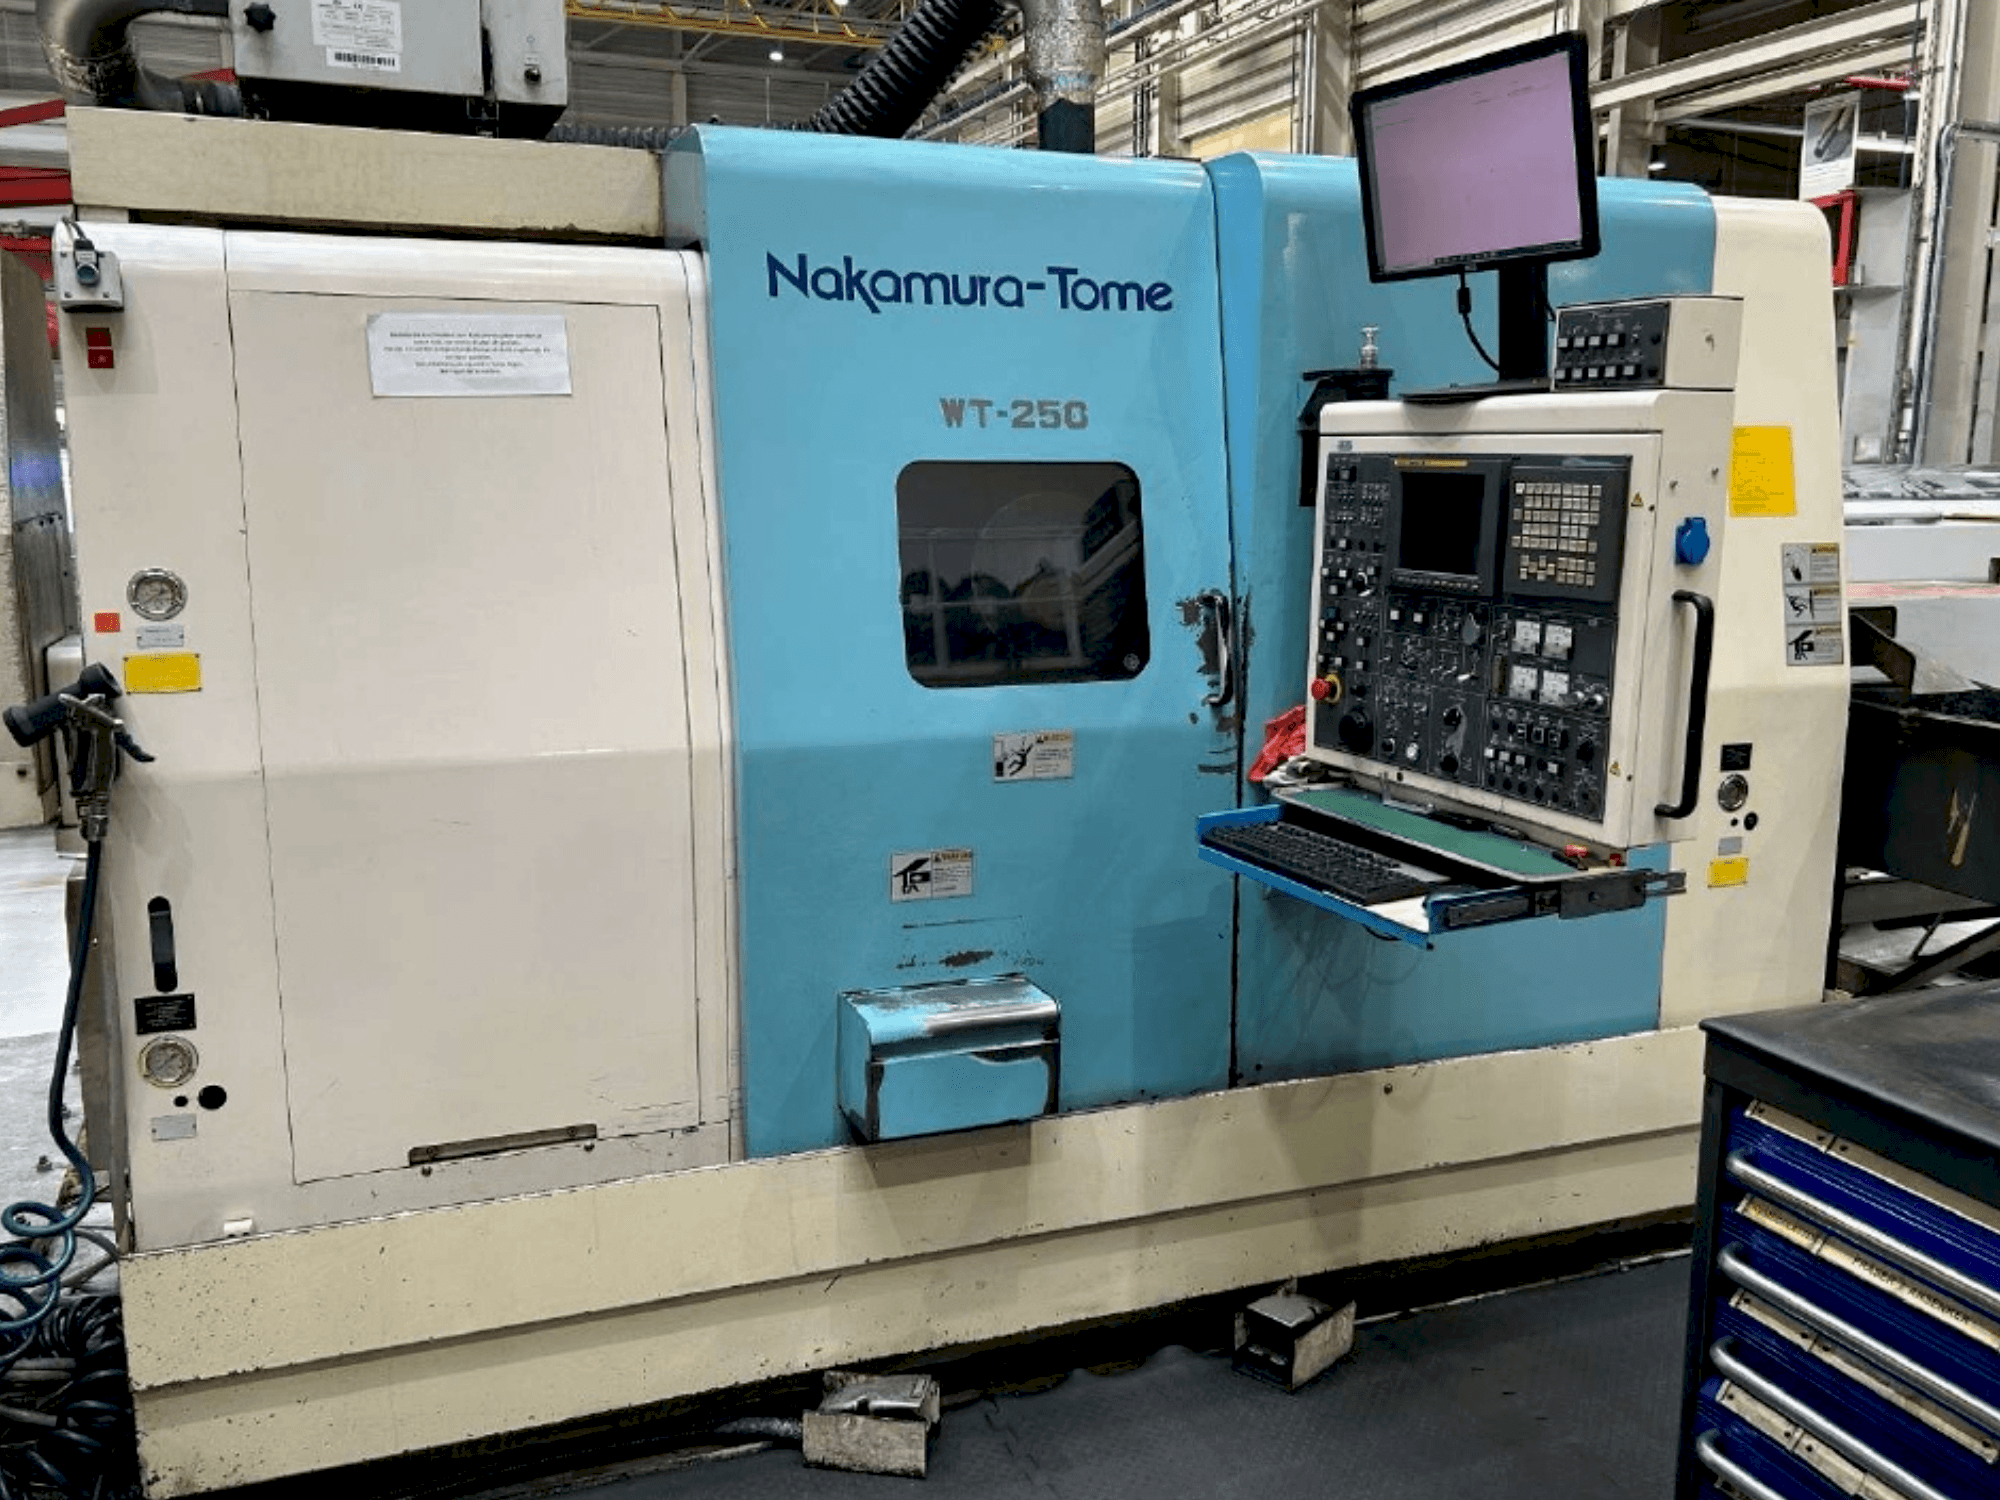 Front view of NAKAMURA-TOME WT 250  machine